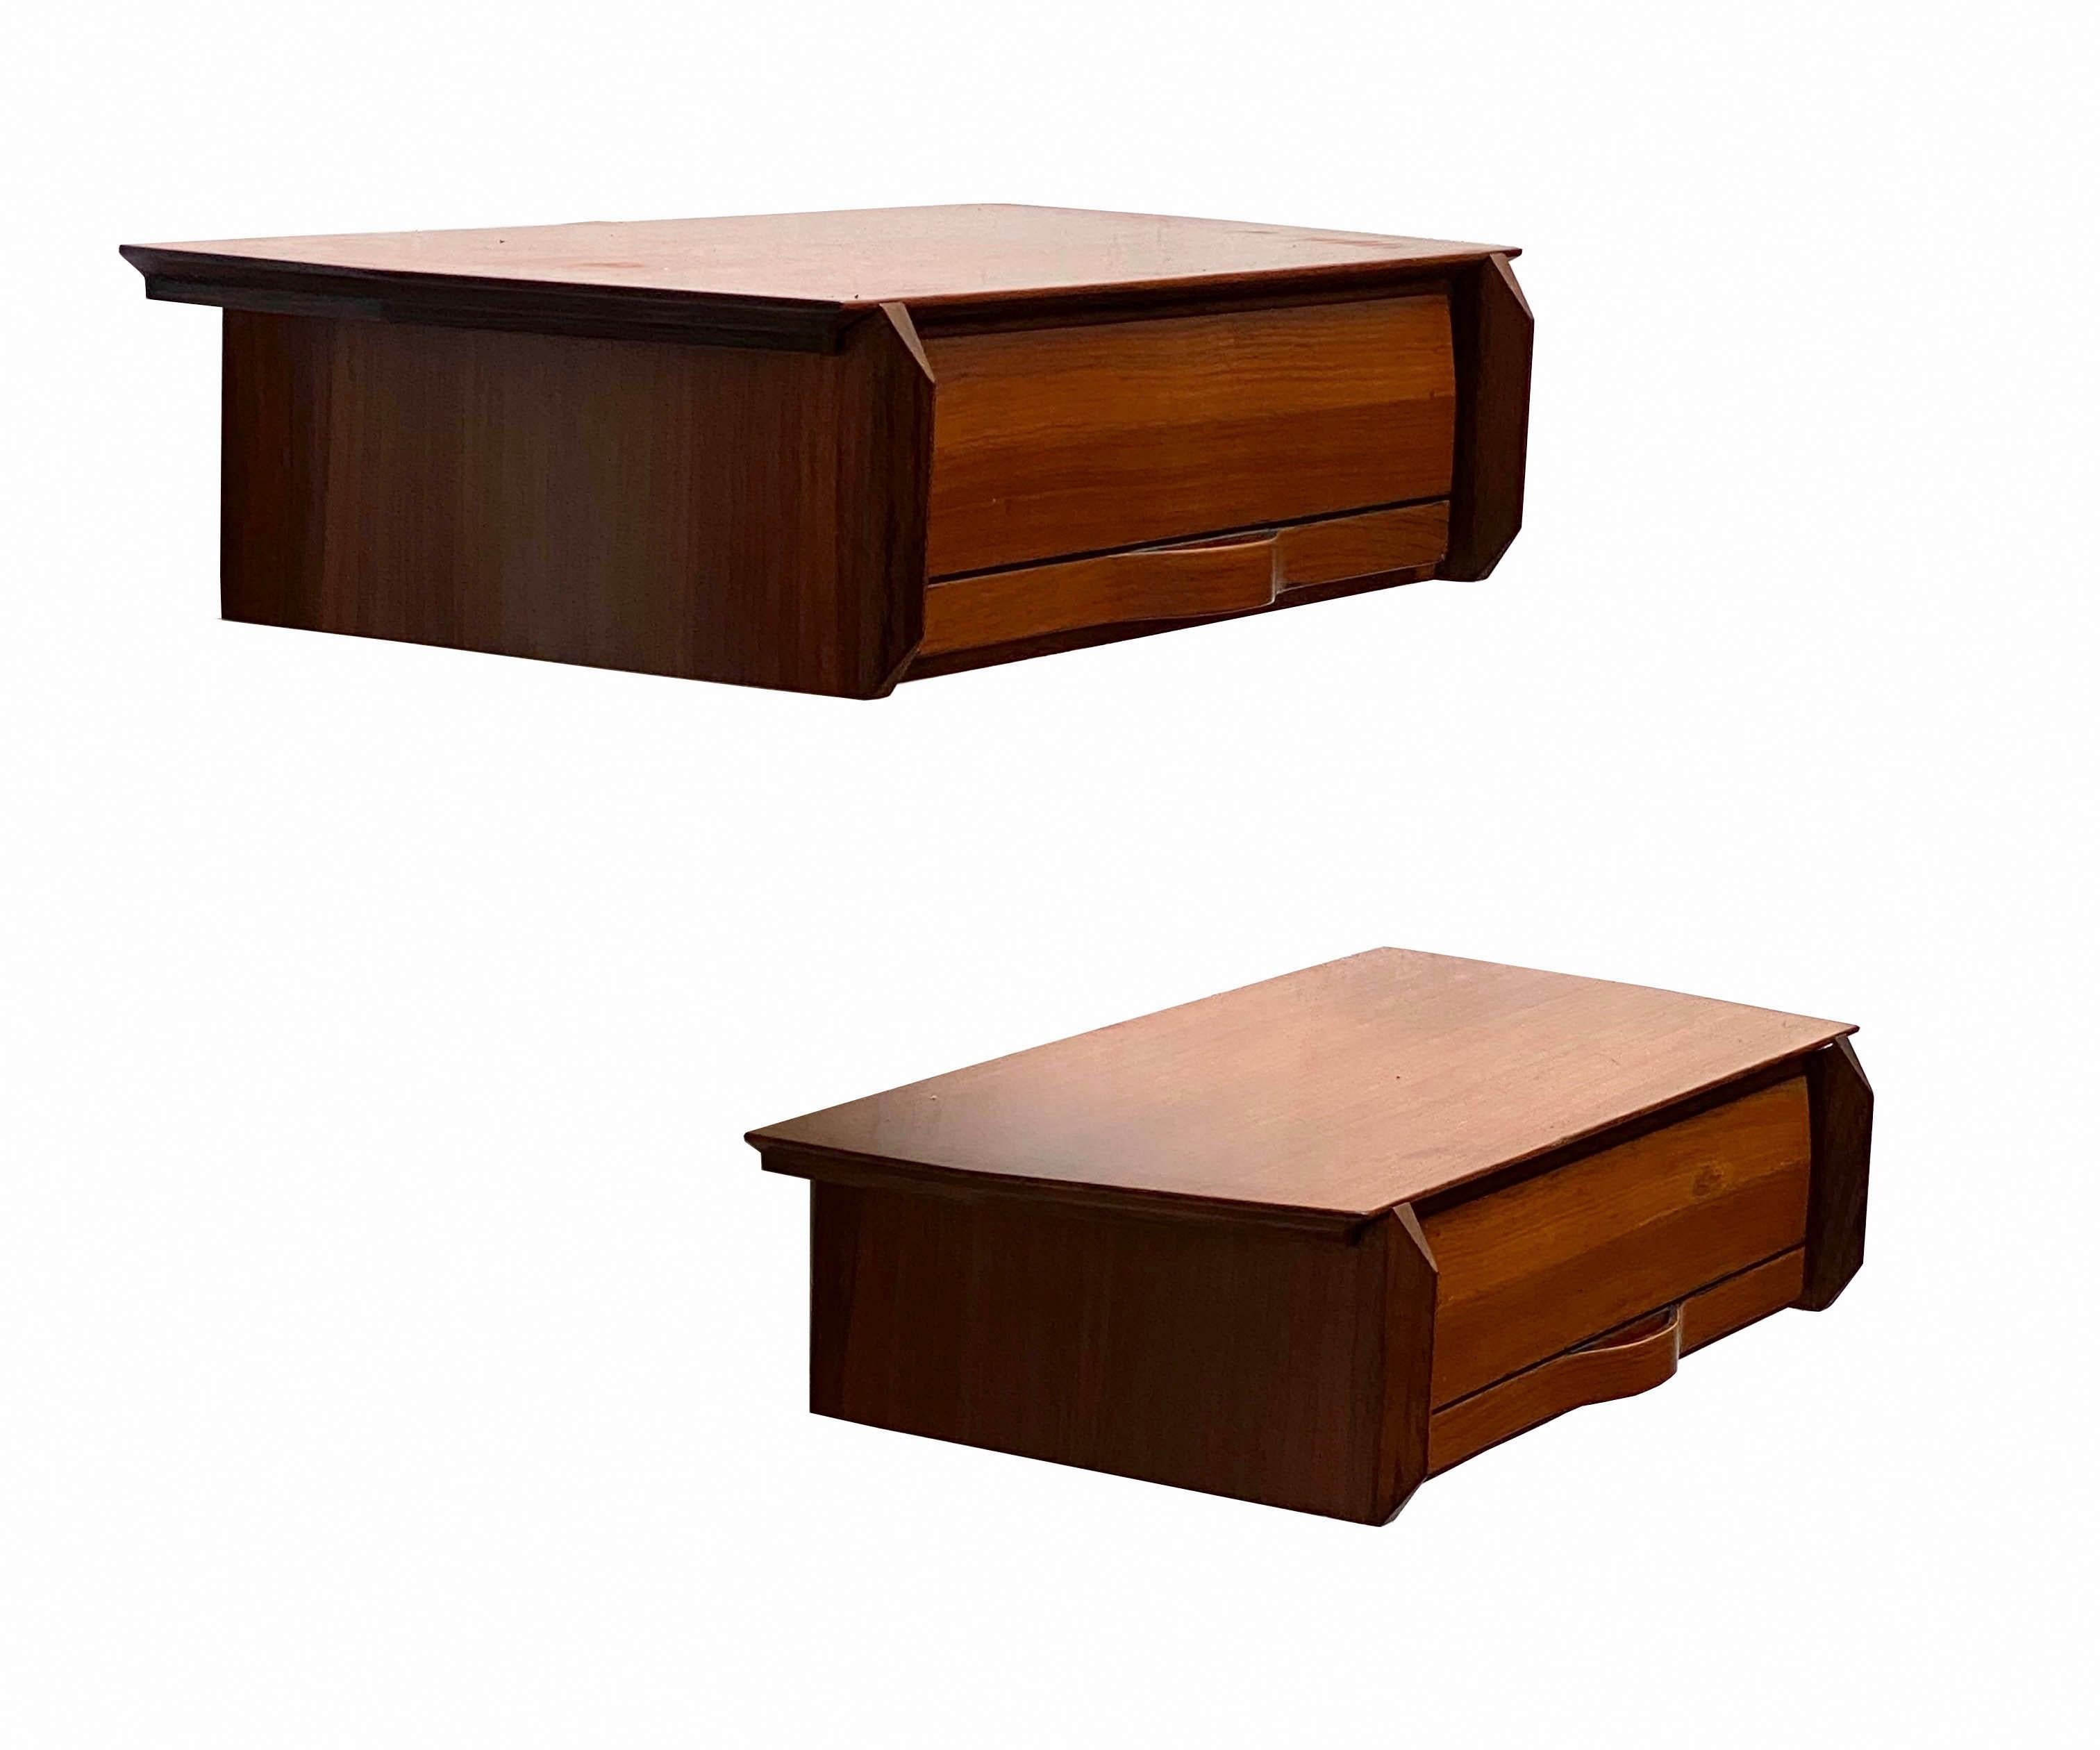 Pair of wooden hanging bedside tables with hidden drawer, designed in the 1960s by Gianfranco Frattini for La Permanente Mobili in Cantù, preserved in excellent condition.
 